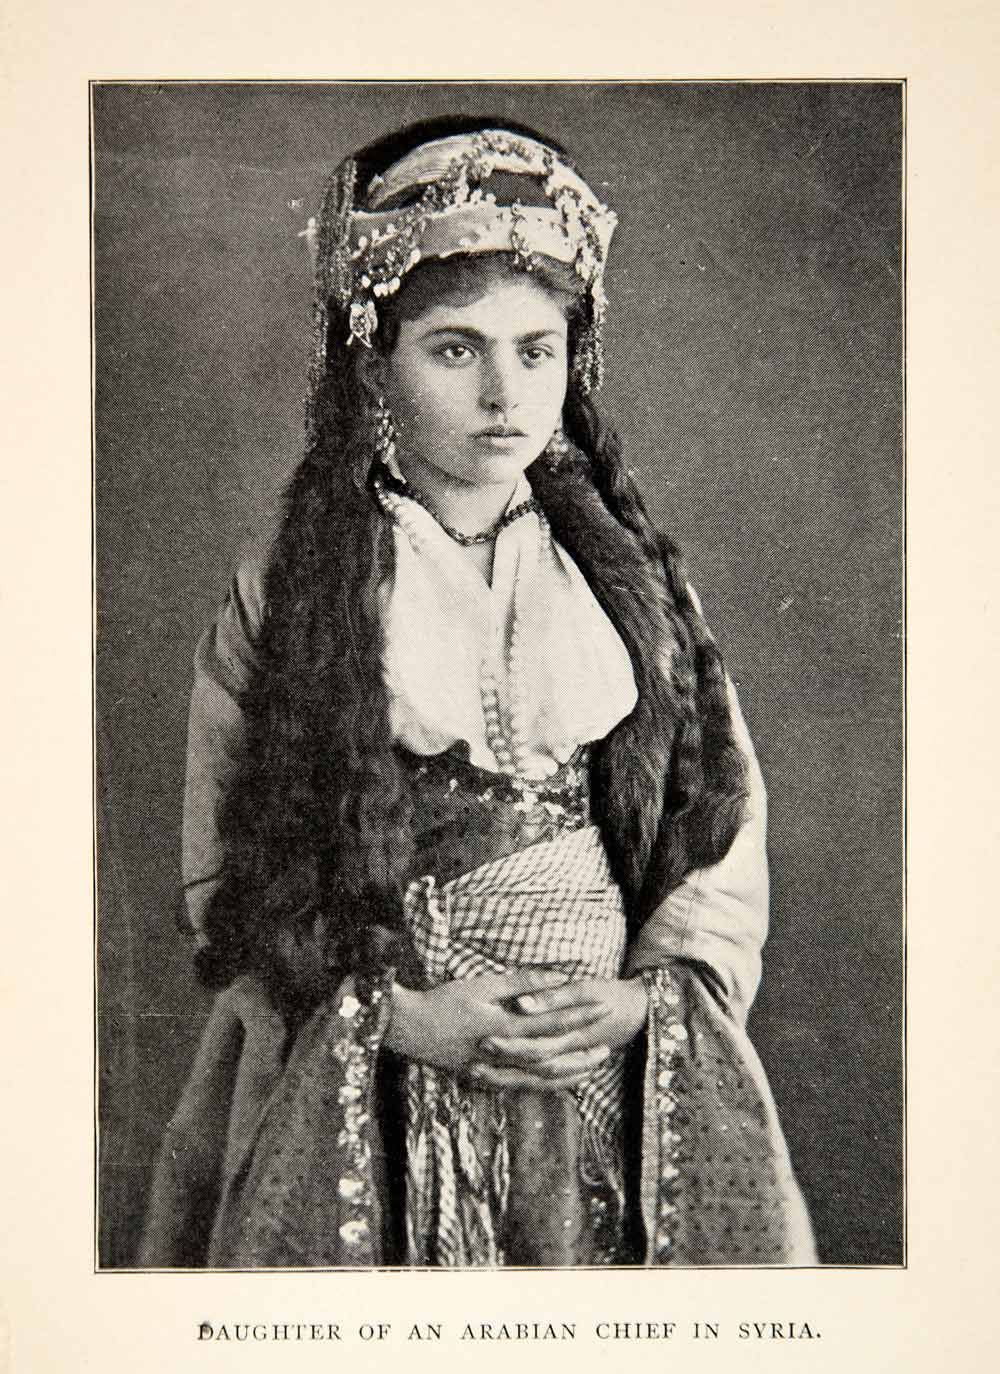 "Daughter of an Arabian Chief in Syria" Woman in traditional costume with jewelry headdress. Photographed by Tancrède Dumas, c.1875